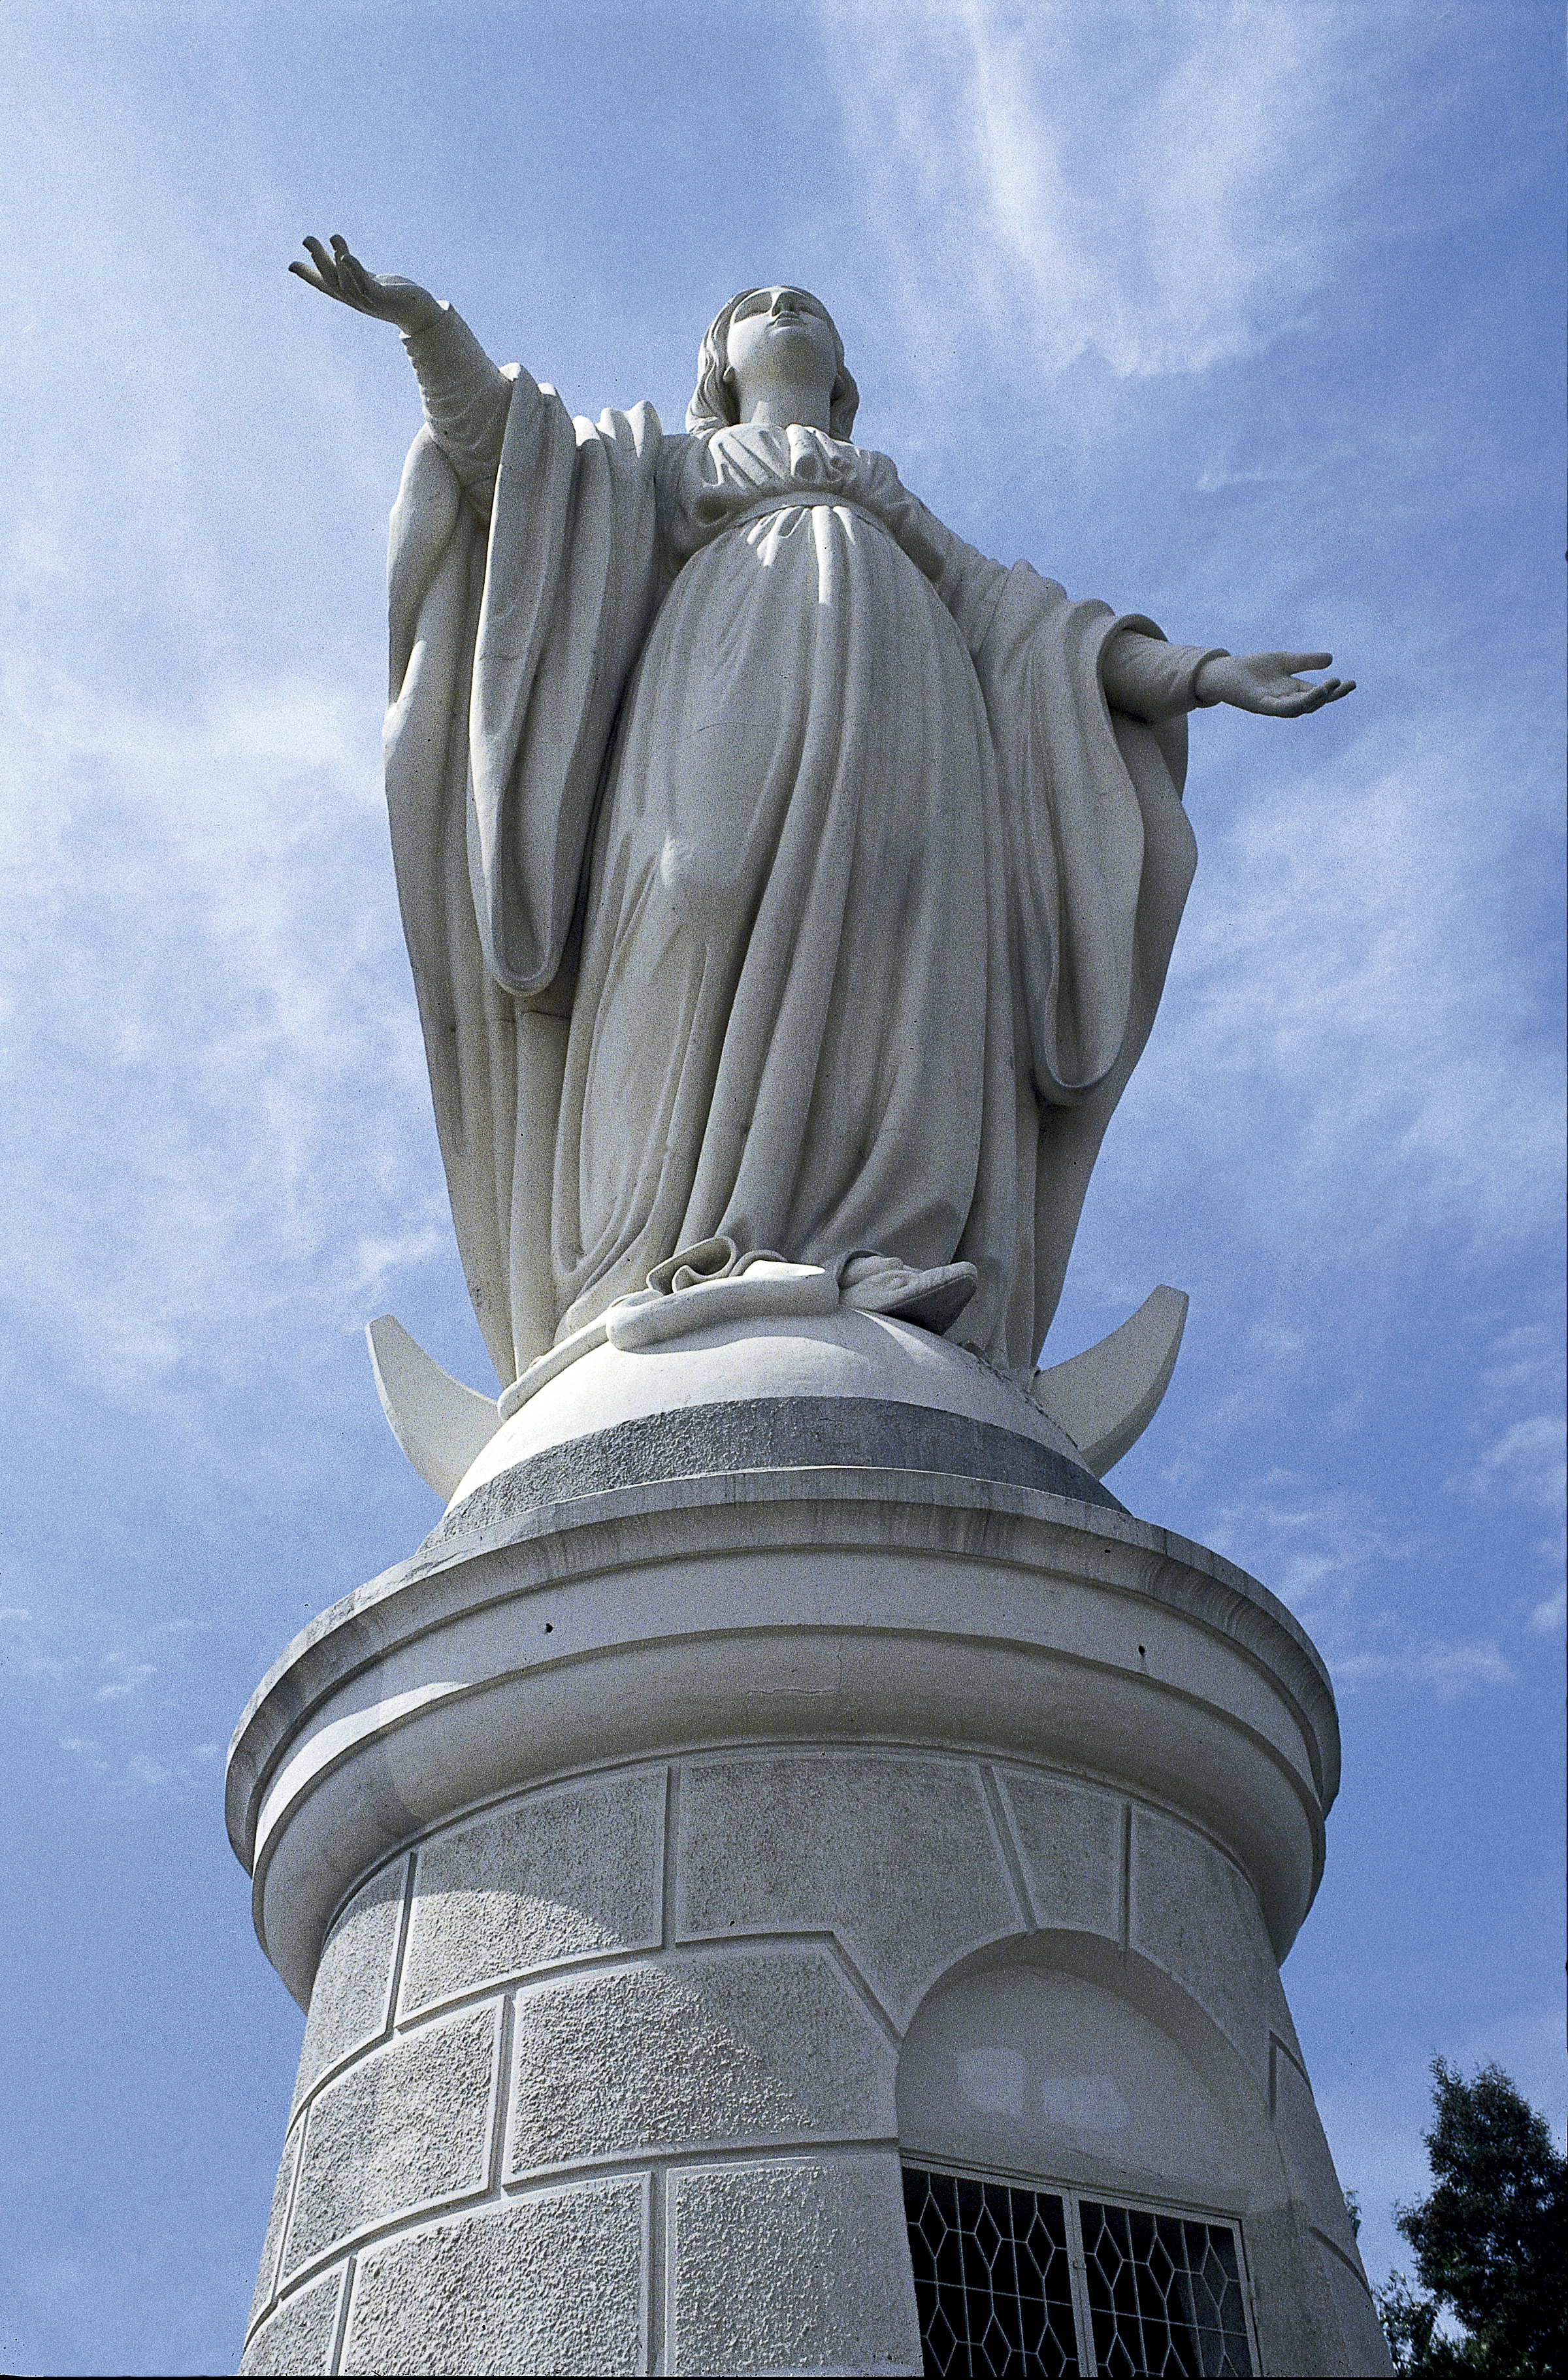 The Statue of the Virgin Mary on San Cristobal Hill, Santiago